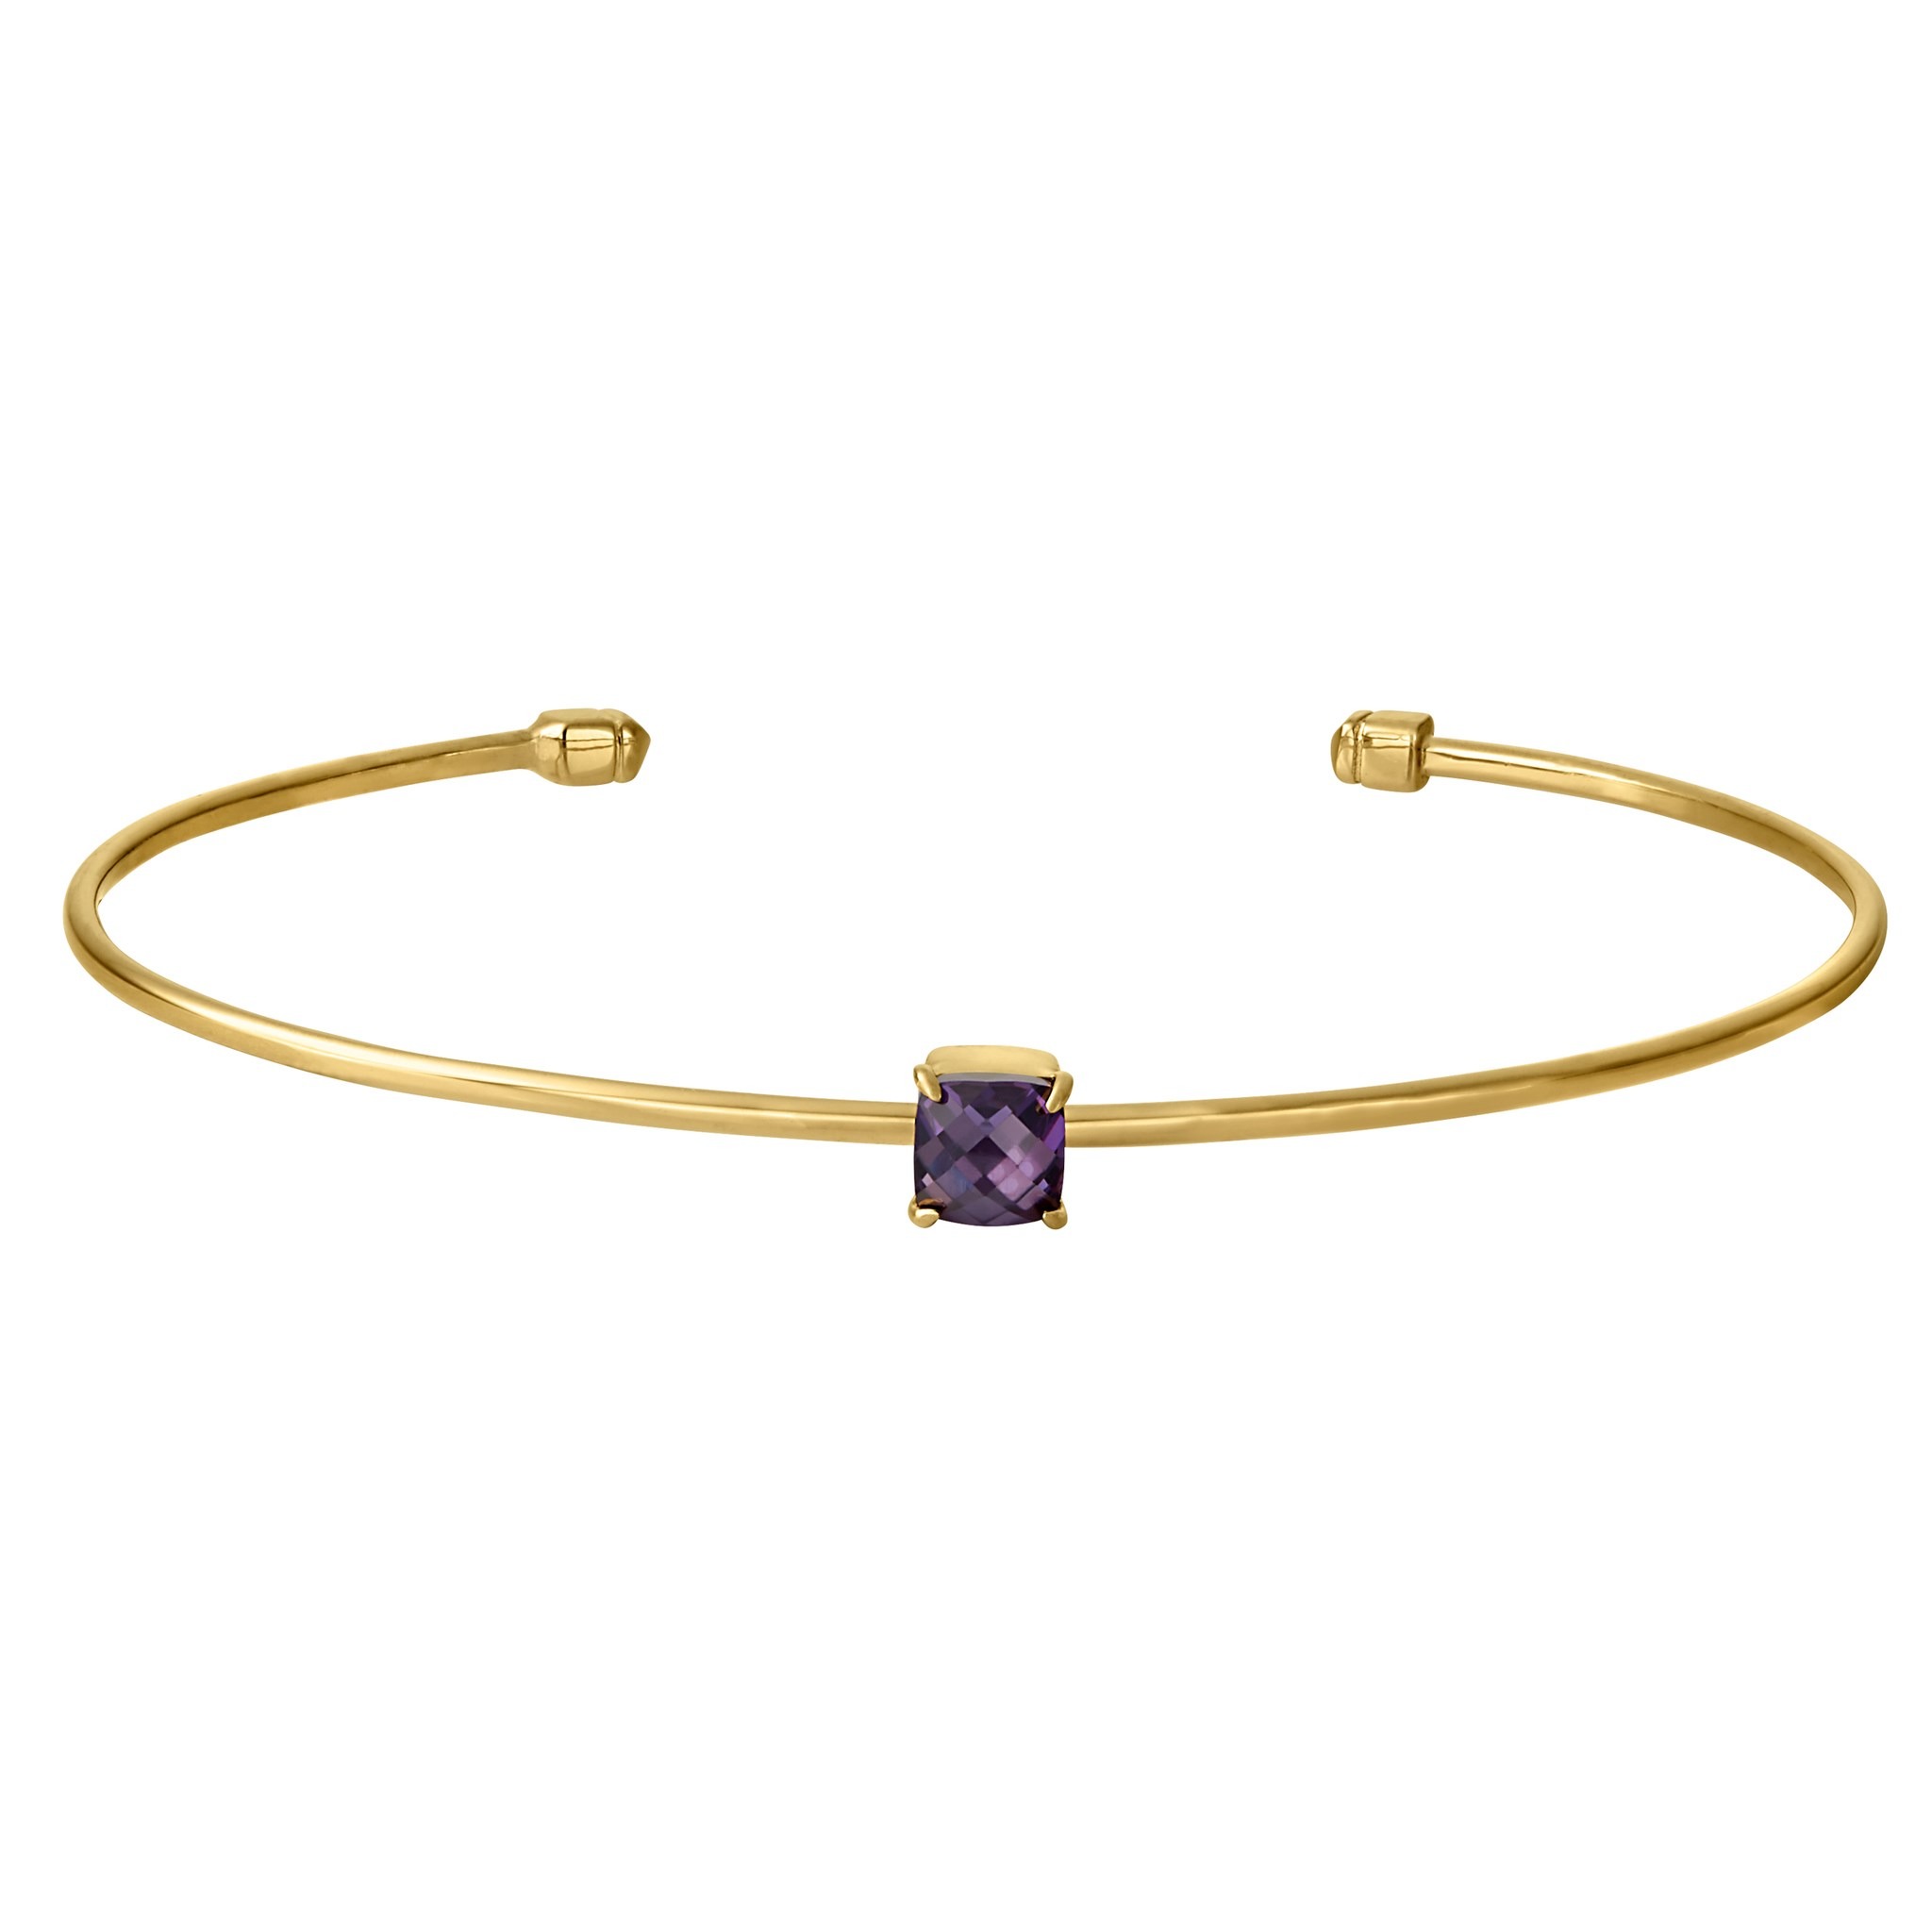 Gold Finish Sterling Silver Pliable Cuff Bracelet with Faceted Cushion Cut Simulated Amethyst Birth Gem - February